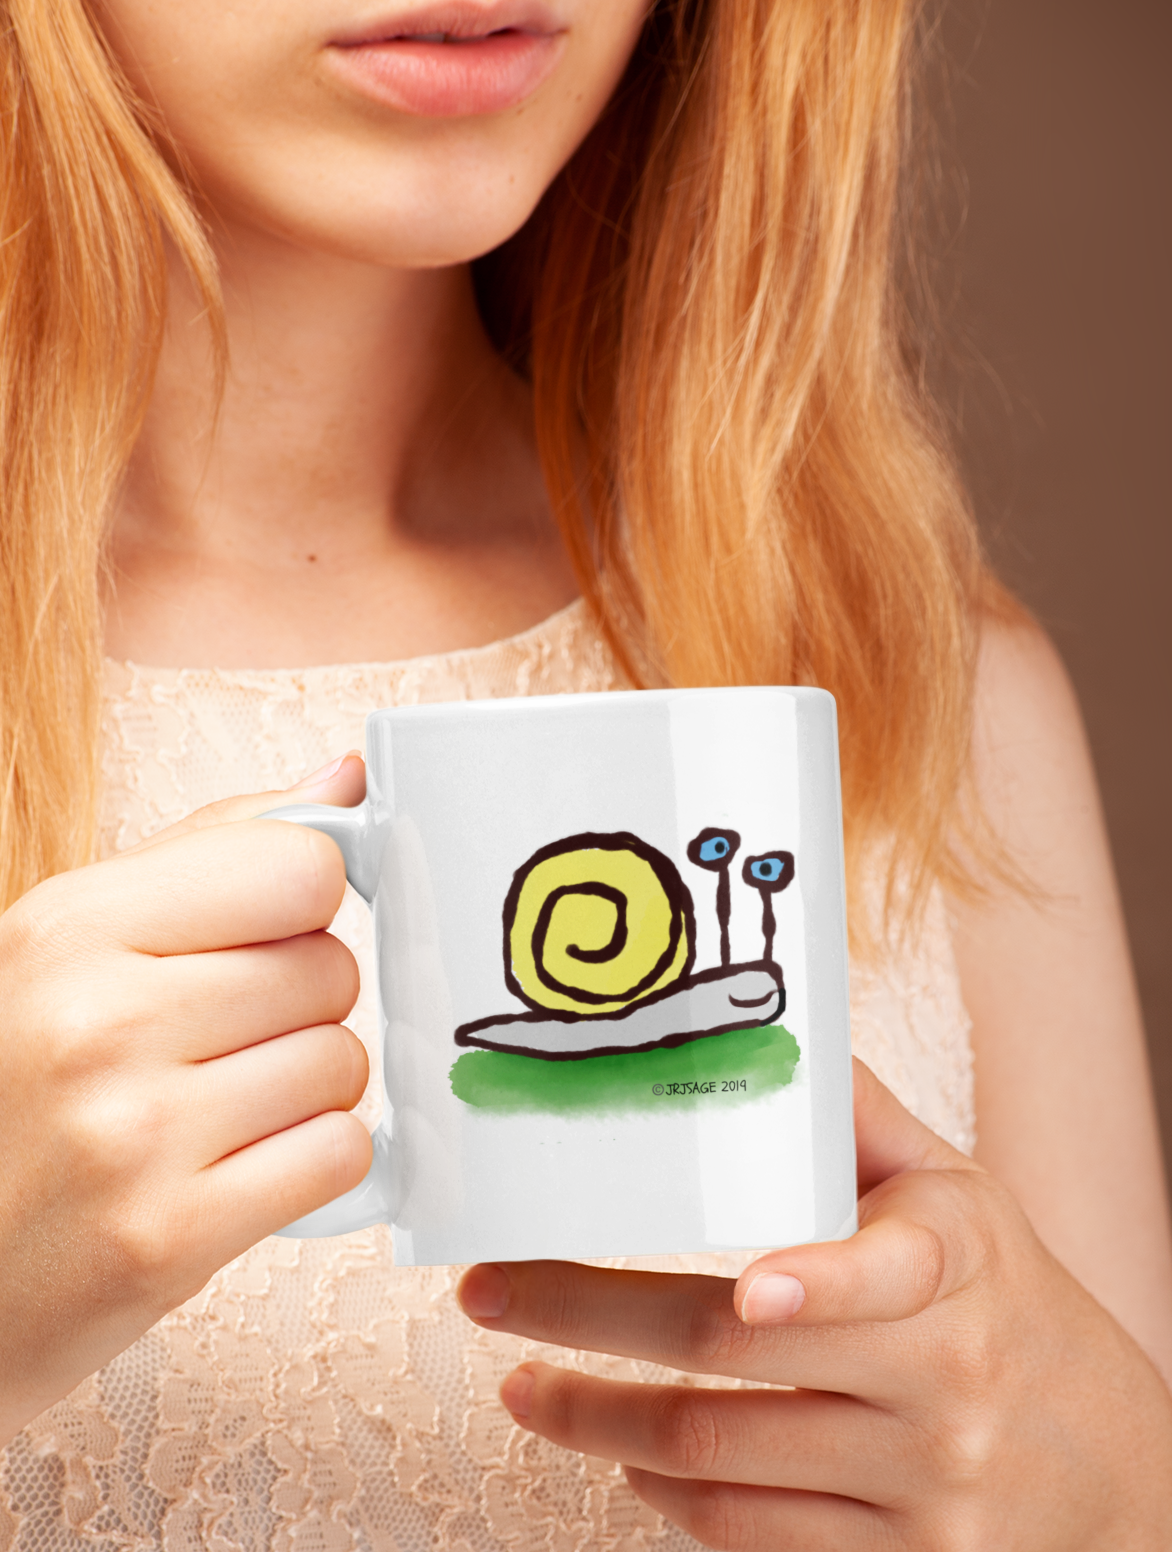 Woman holding Cute Sly the Snail illustrated coffee mug designed by Hector and Bone